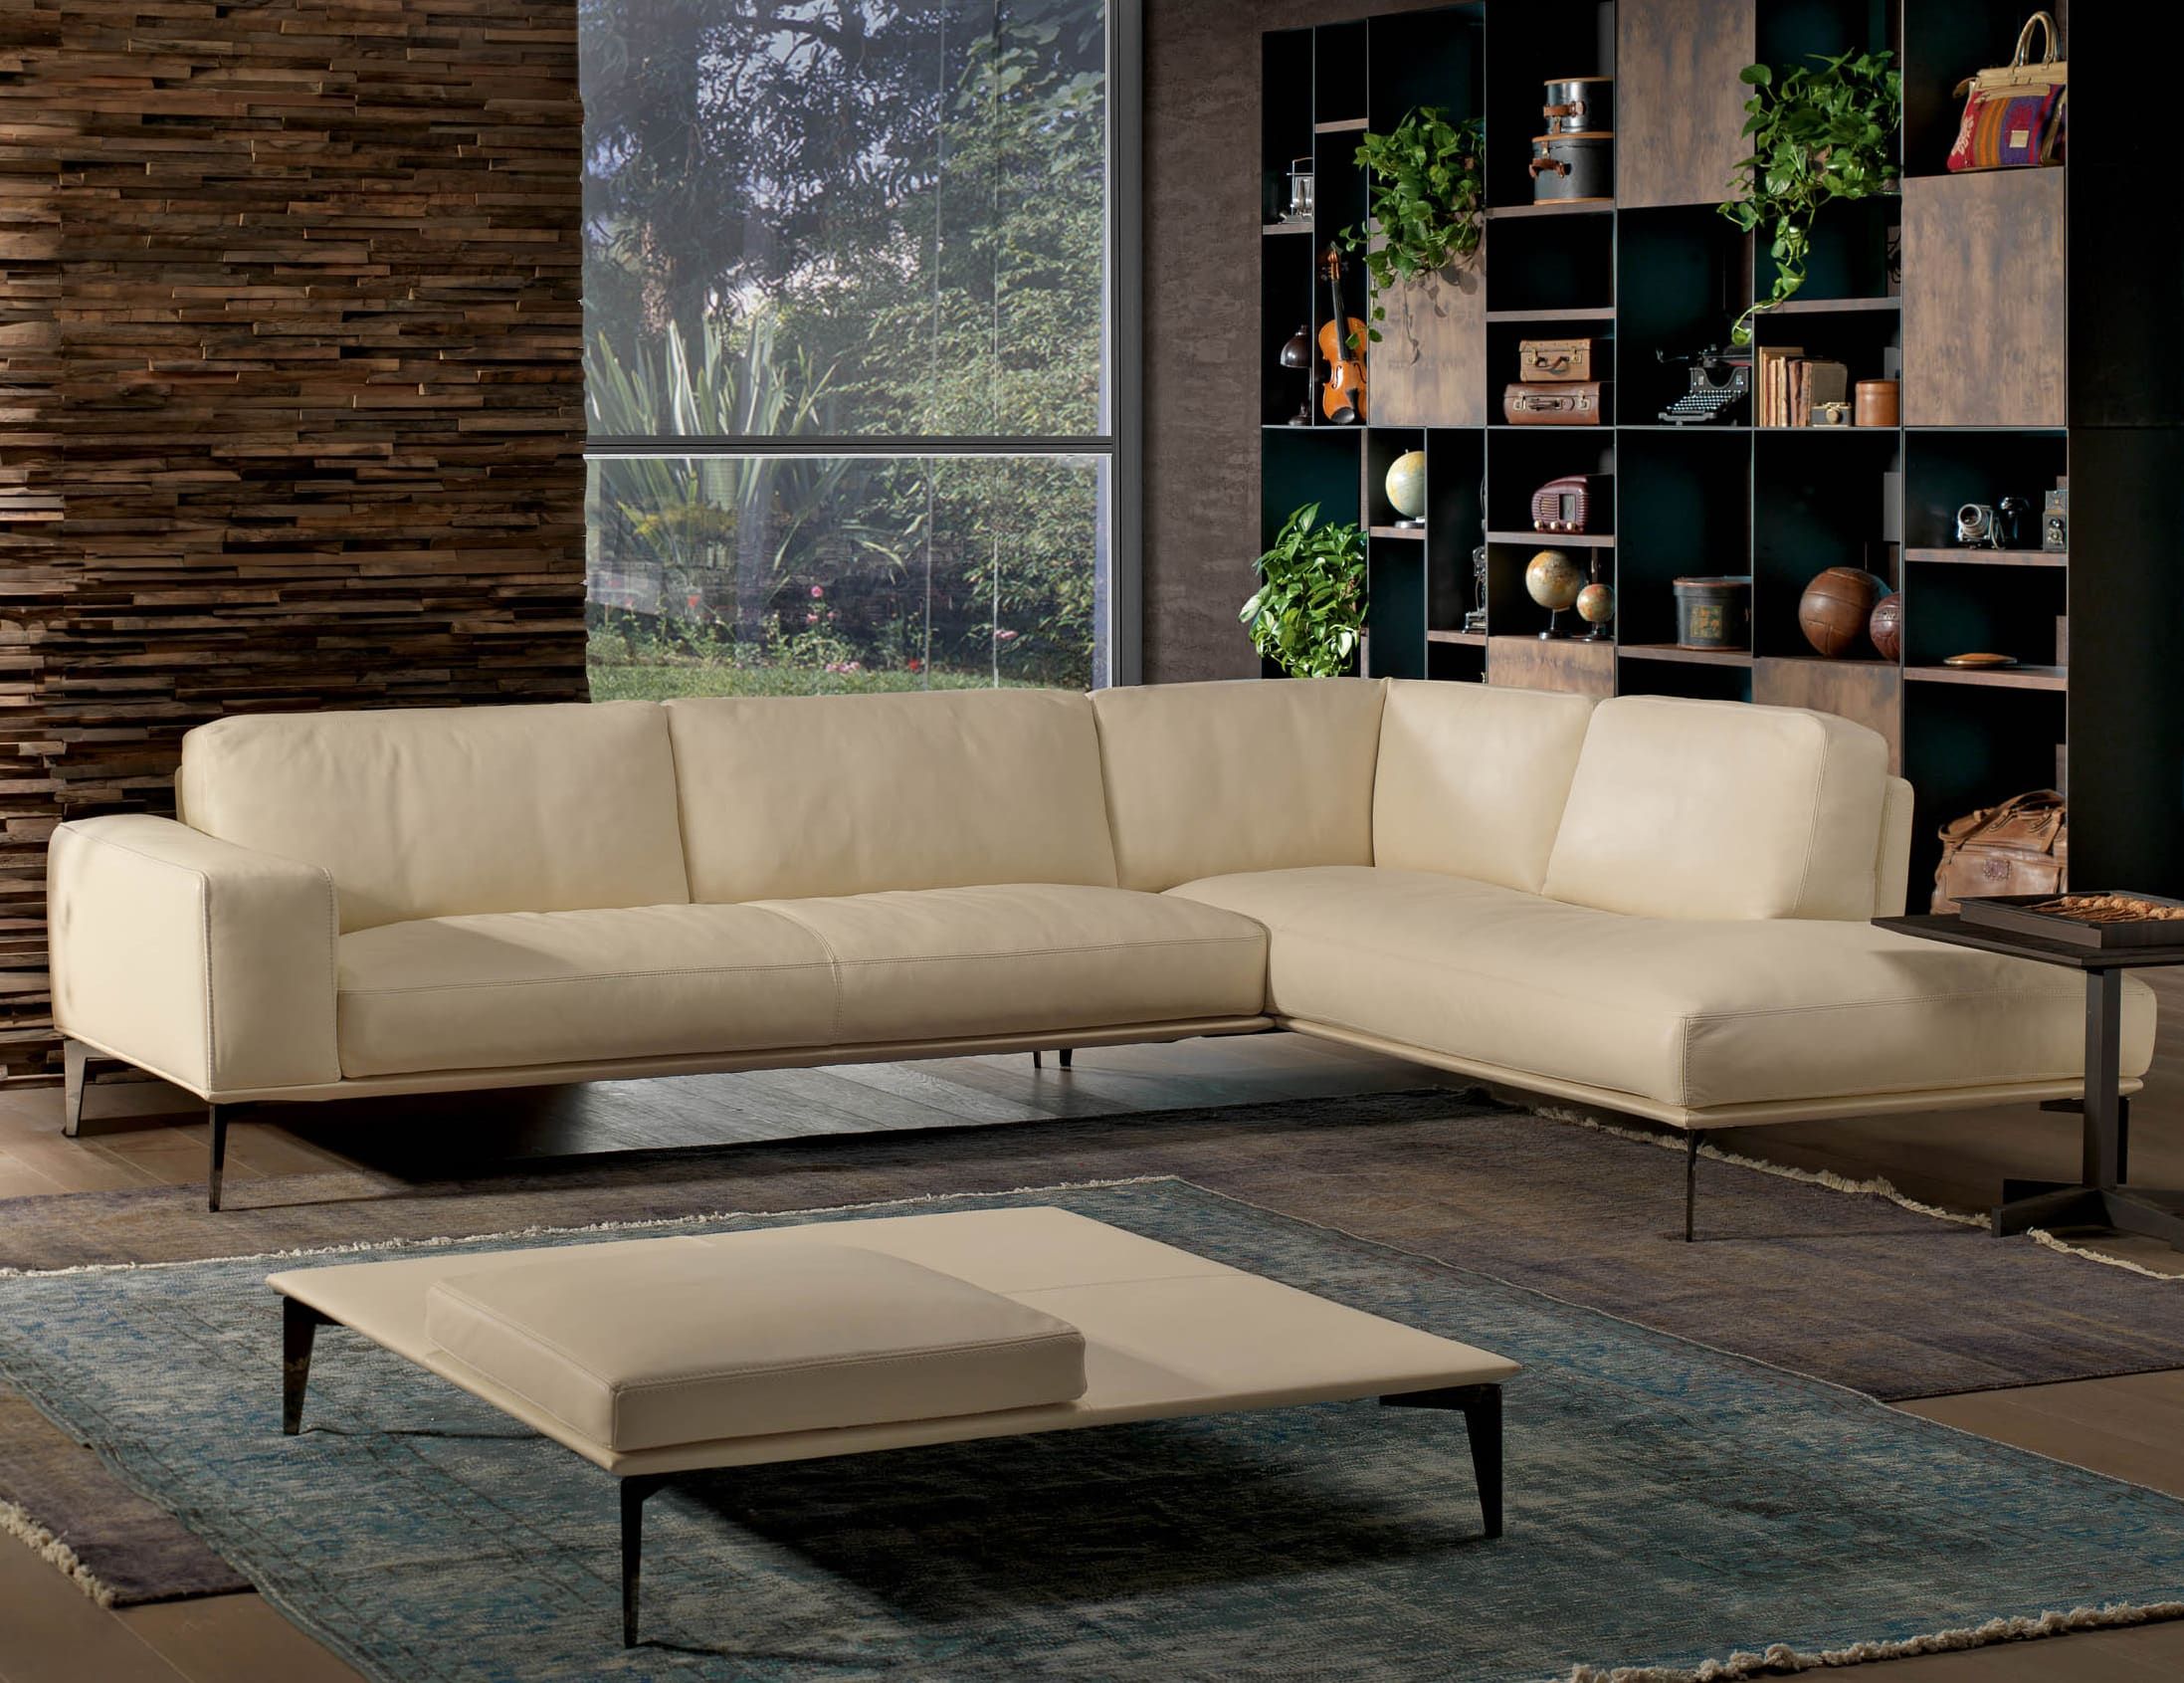 Aida contemporary Italian sectional with cream leather